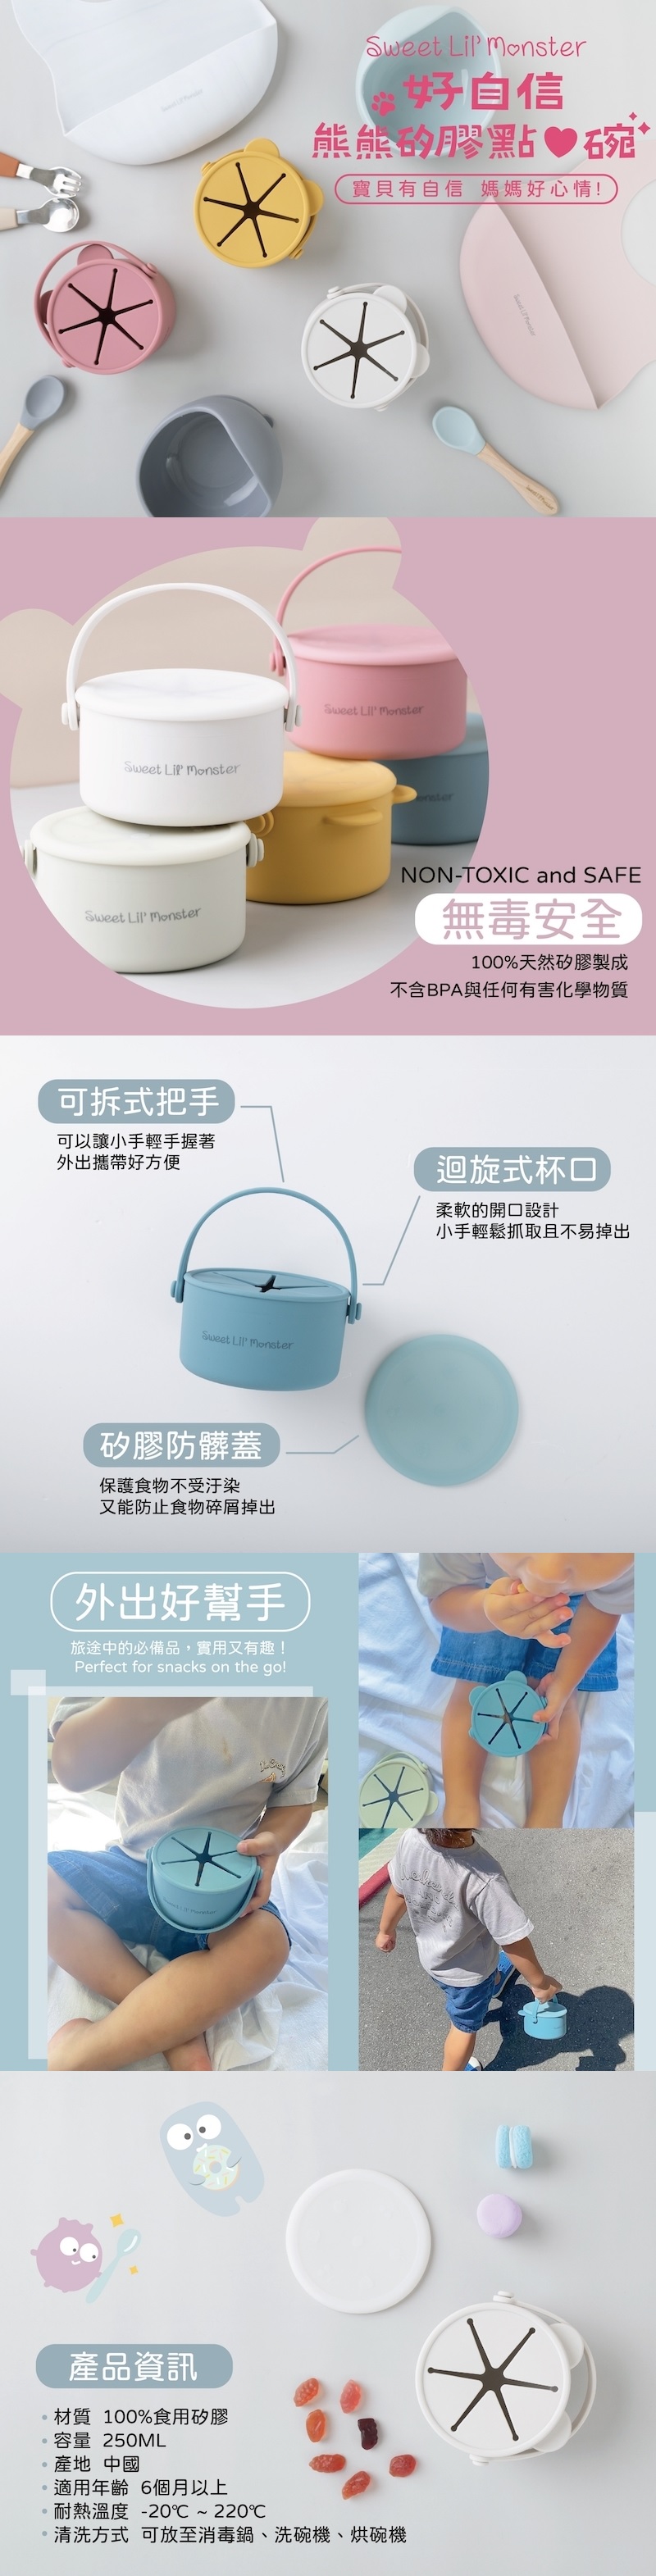 sweet little monster, silicone bowl, silicone snack pot, snack cup, 點心碗, 點心杯, silicone tableware, snack on the go, 矽膠餐具, 怪獸寶貝